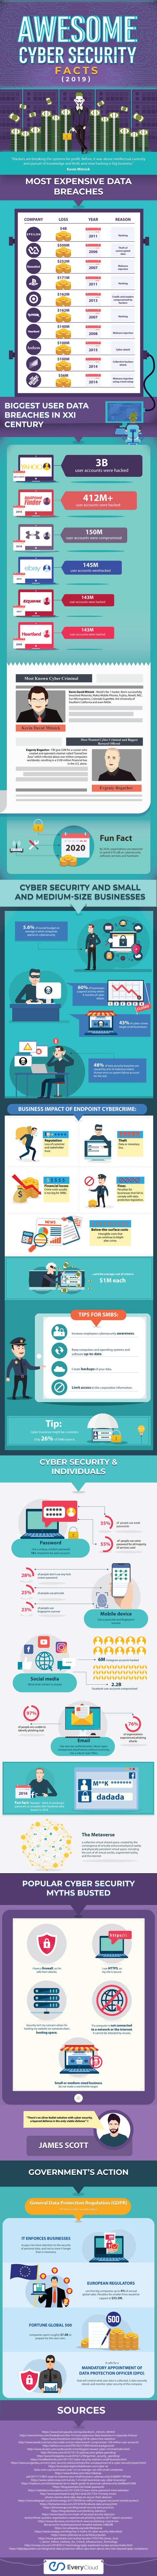 Infographic: Cyber Security Facts And Stats